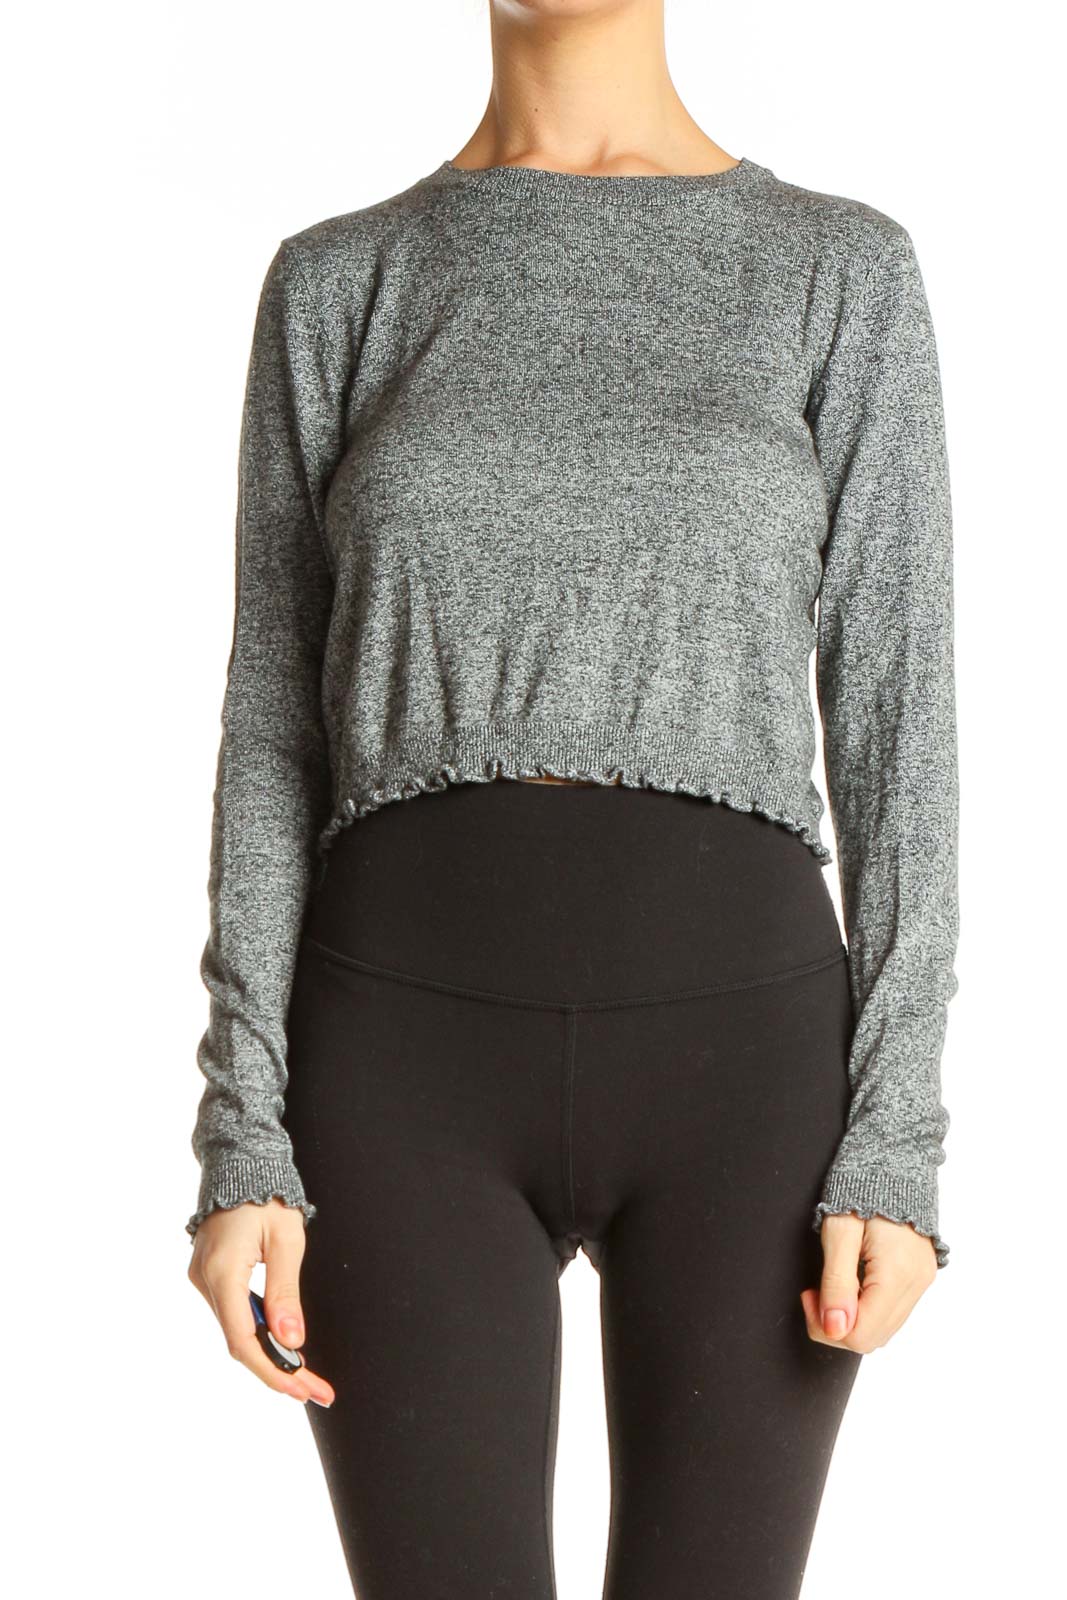 Gray Textured All Day Wear Cropped Sweater Front